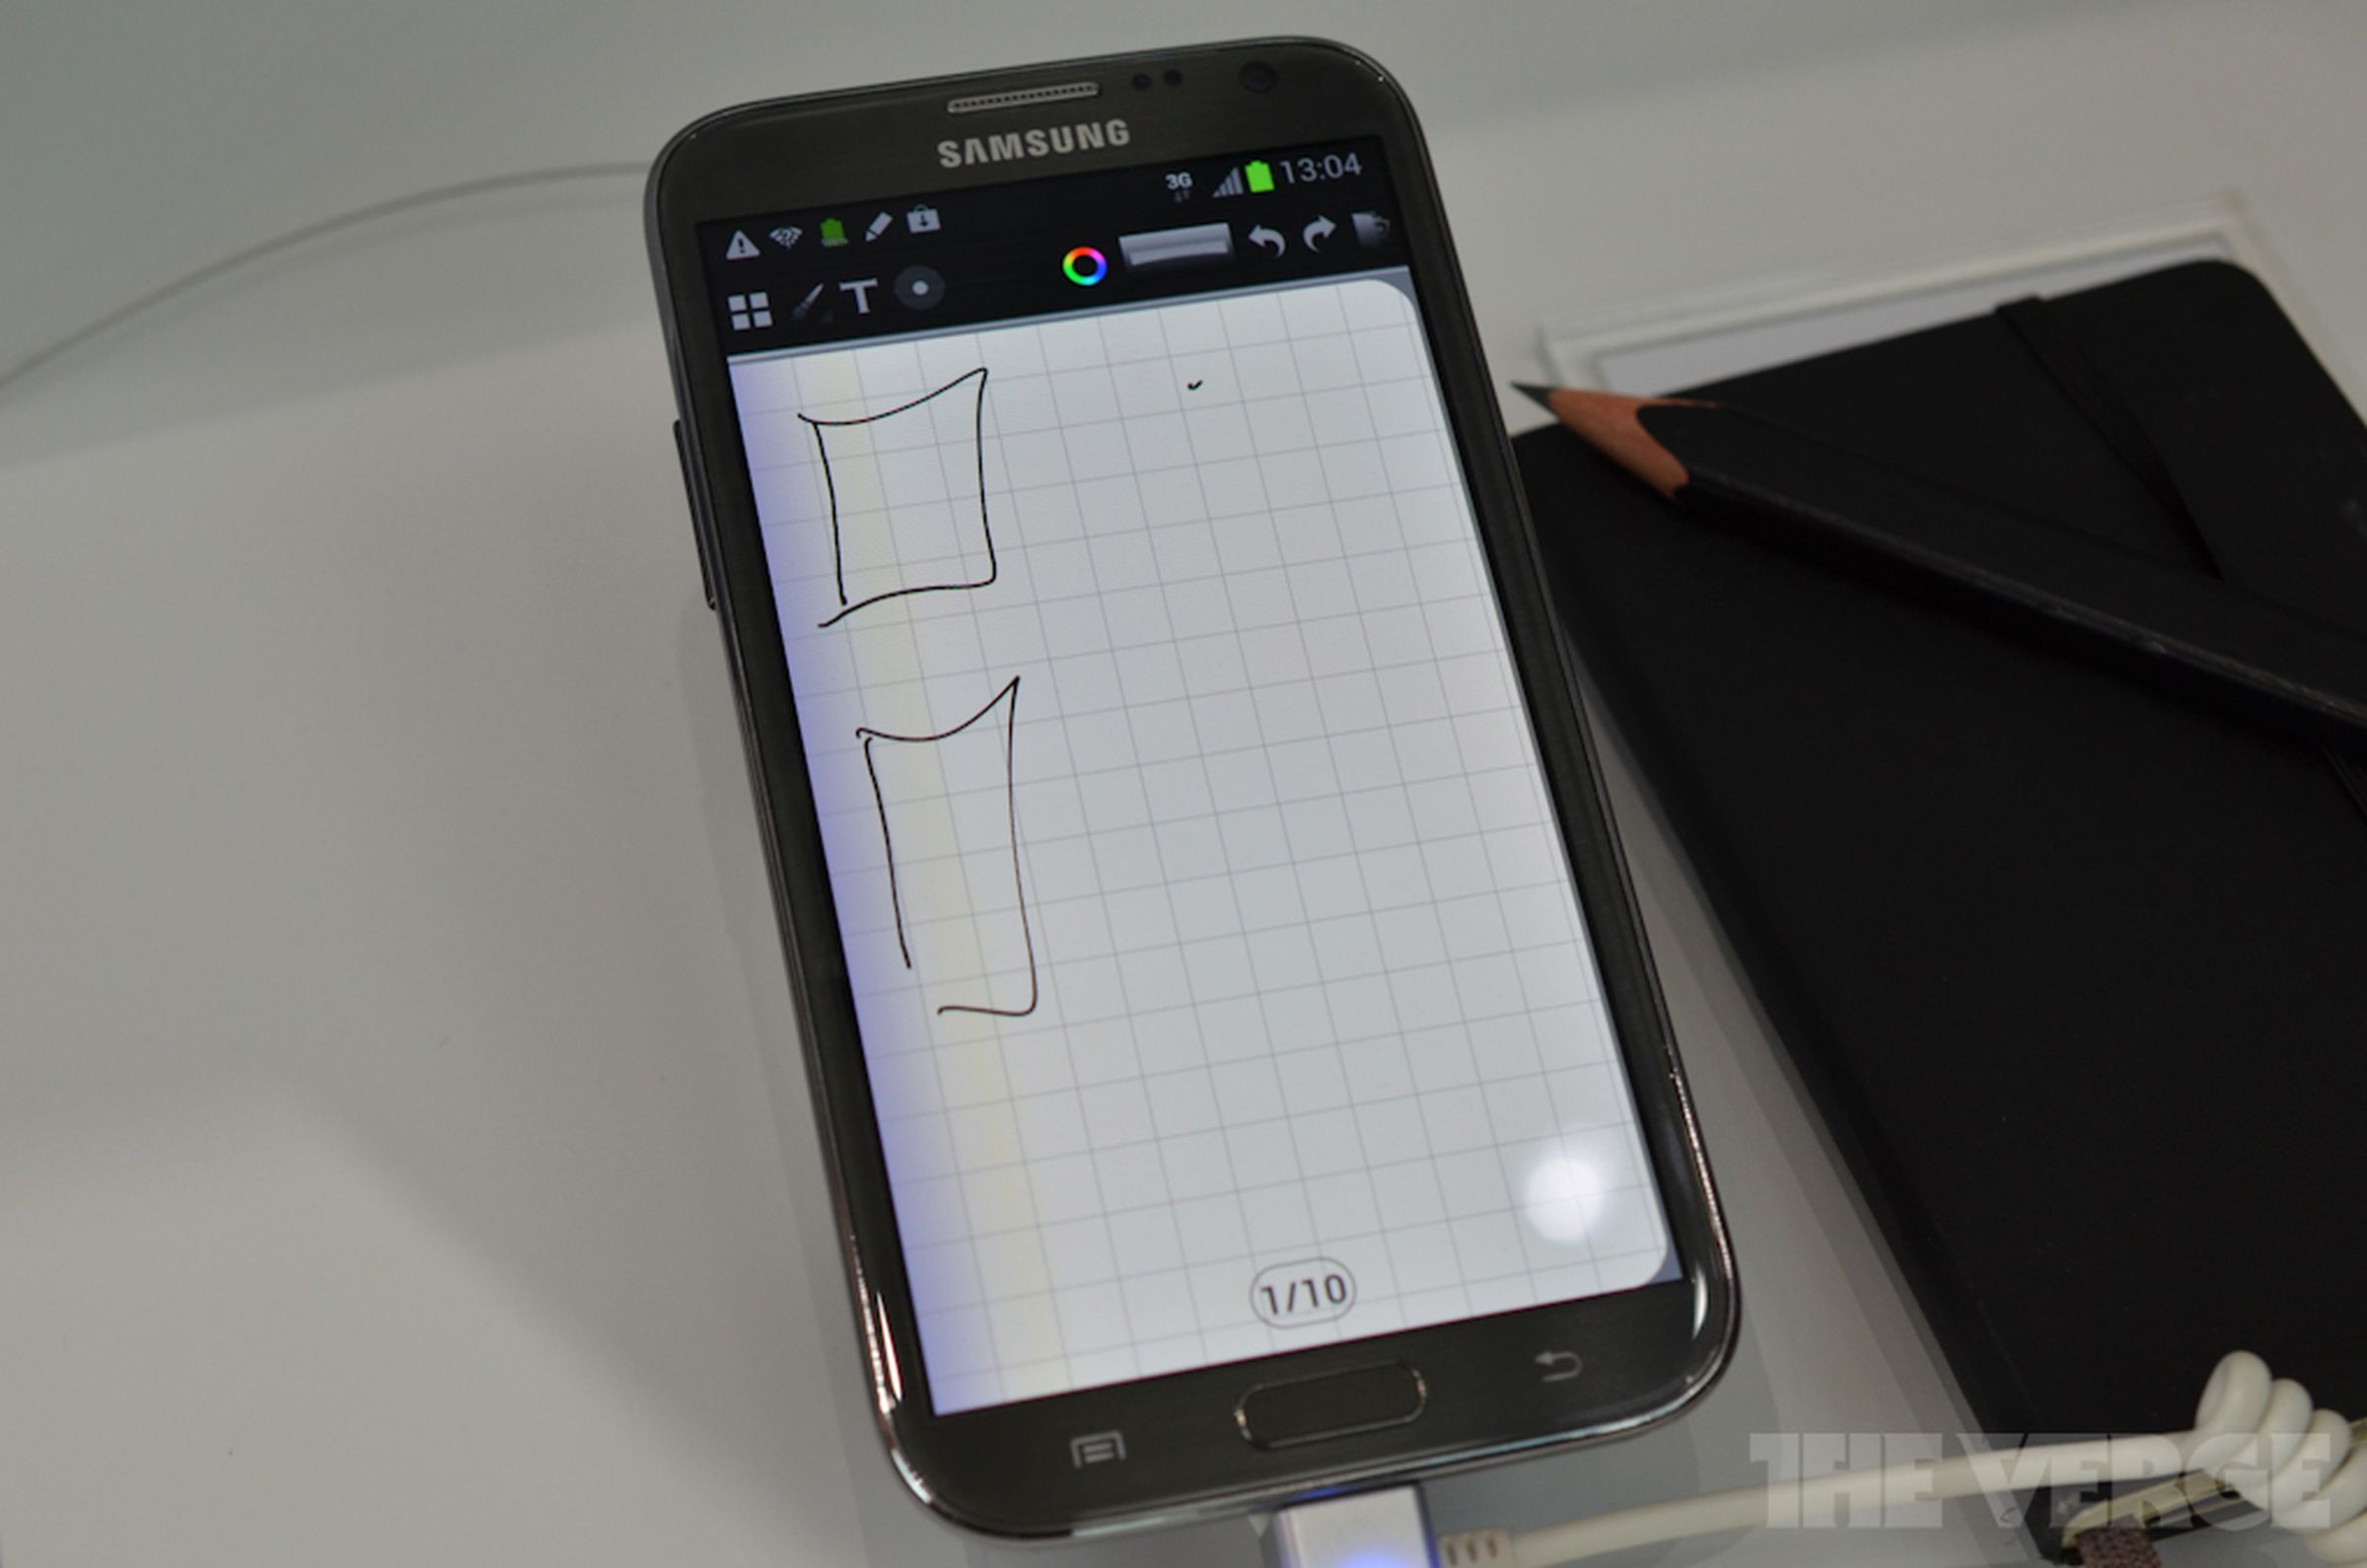 Moleskine app for Android hands-on pictures